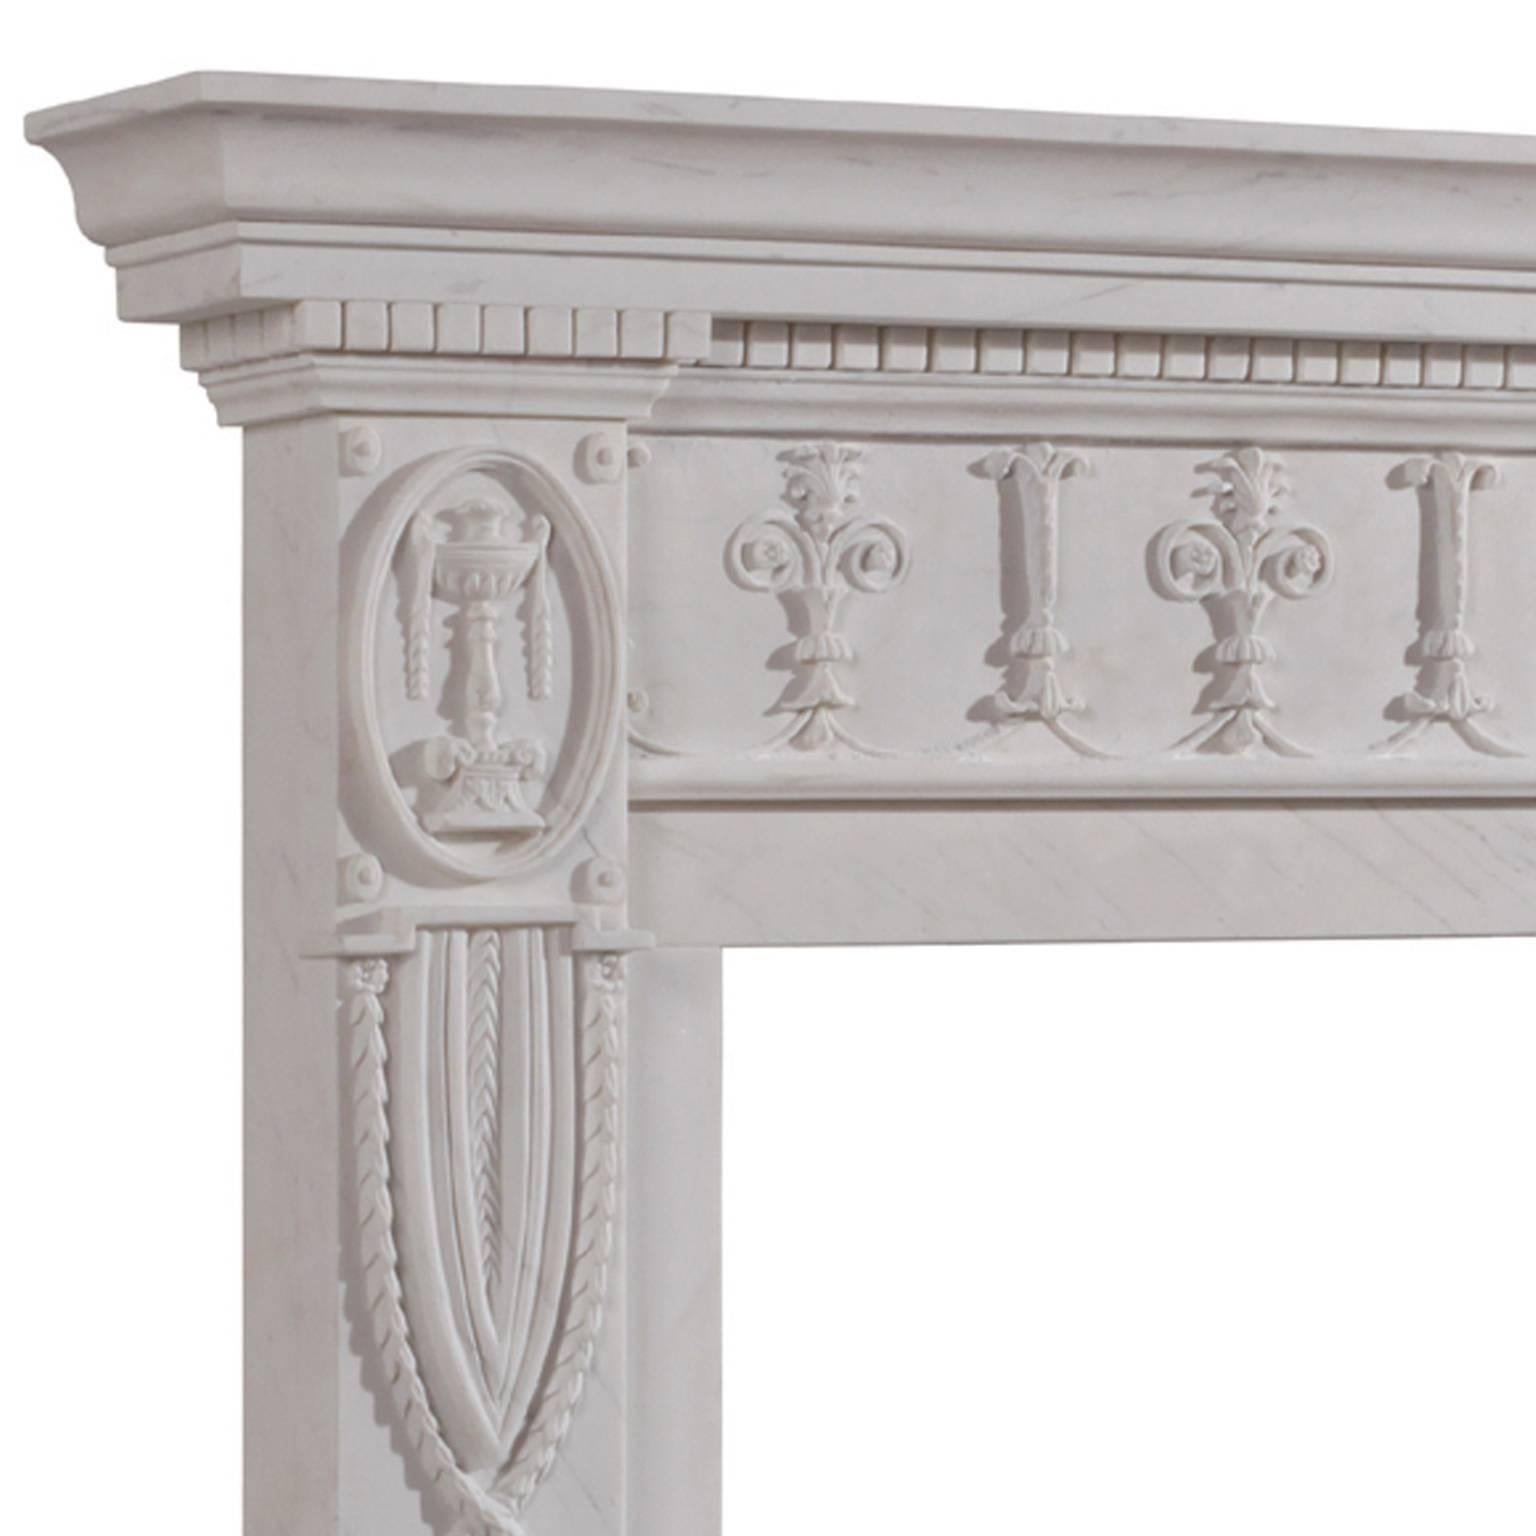 Unique fireplace produced under license from Kenwood house Hampstead, London. Elements of architectural elegance. Inspired by a mid-18th century Kenwood house chimney-piece in the neoclassical style, this acquisitions heirloom is embellished by